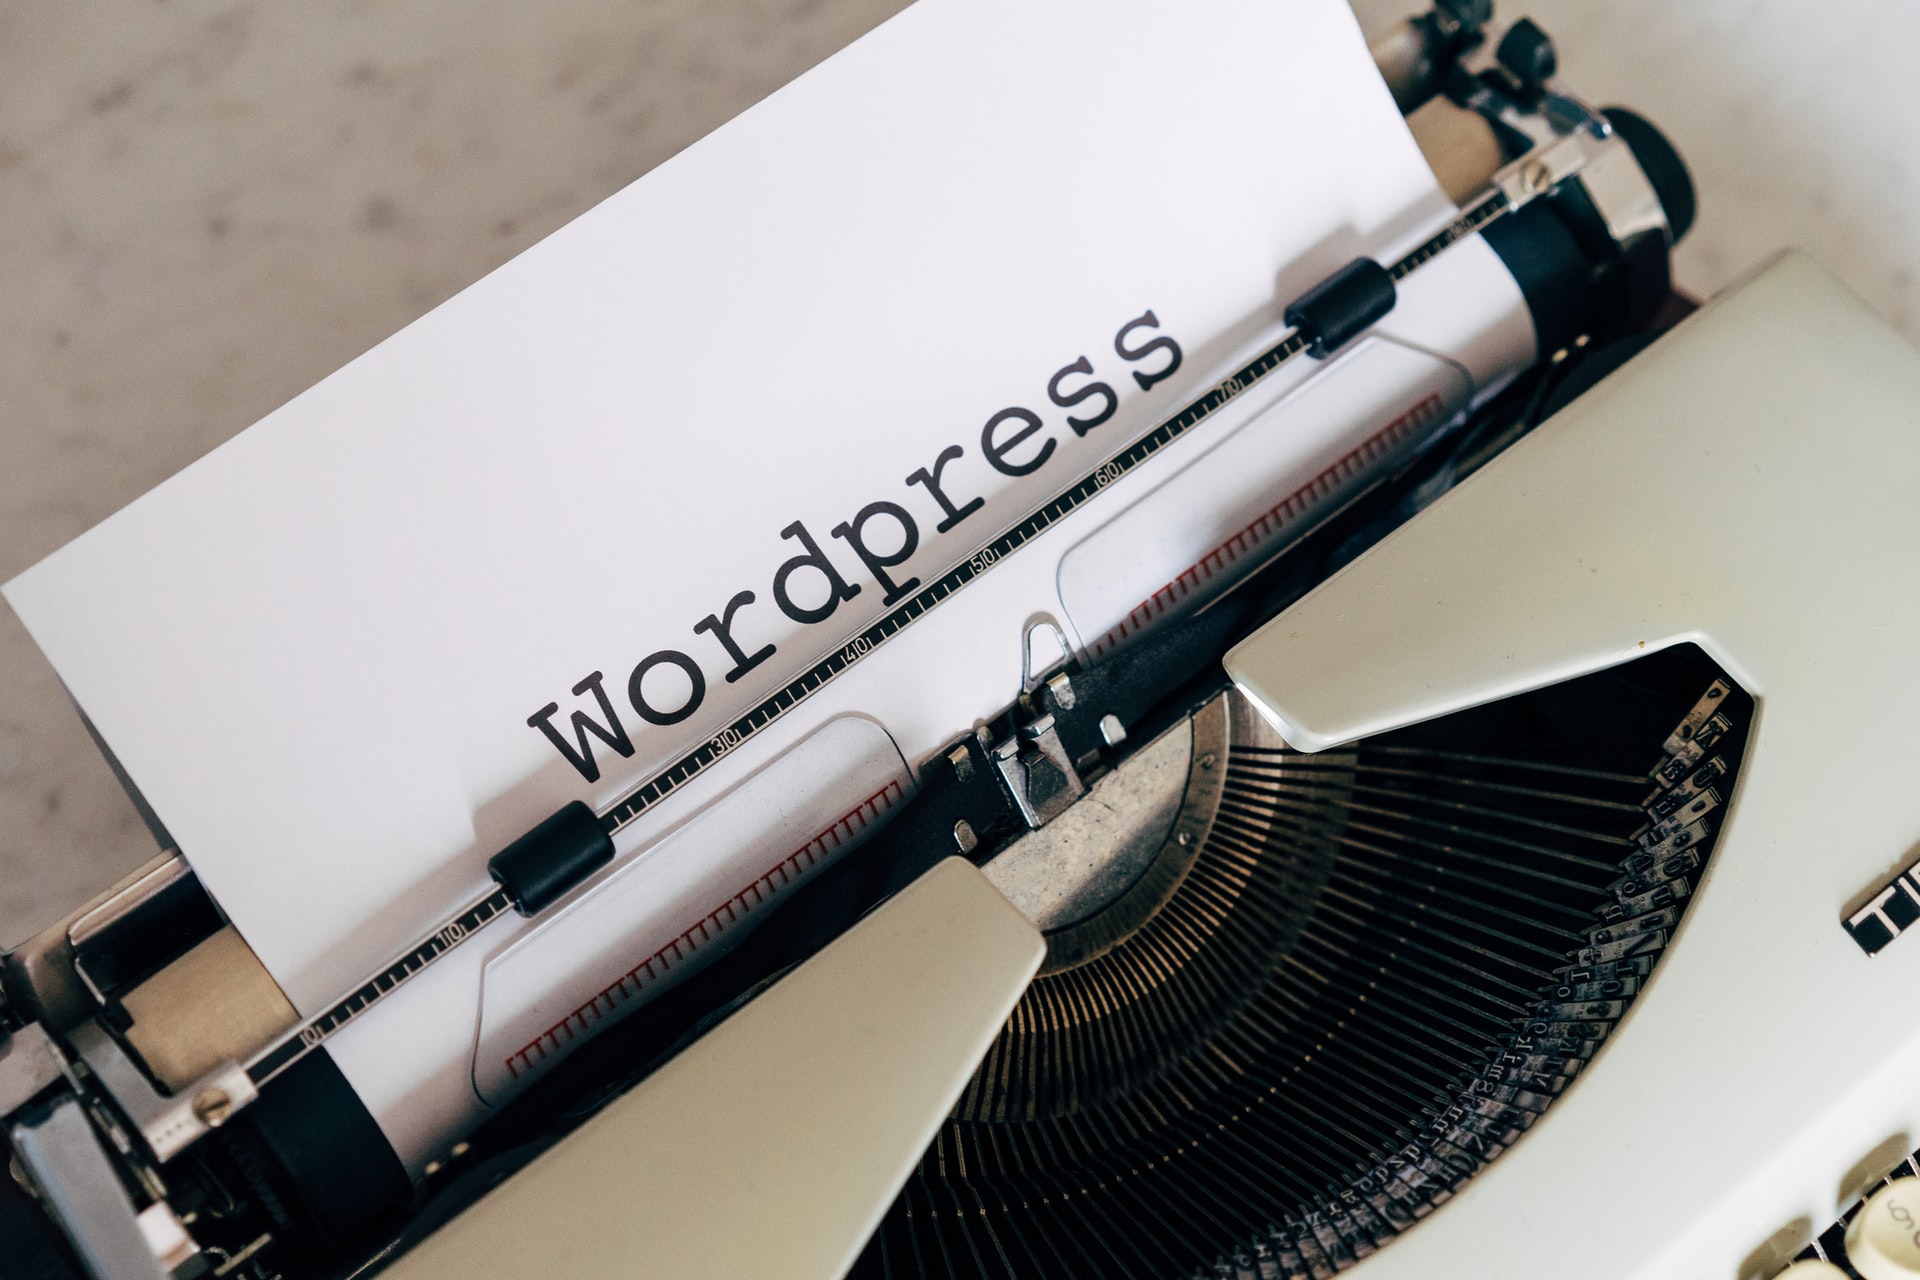 Featured image for “3 Reasons Why We Use WordPress”